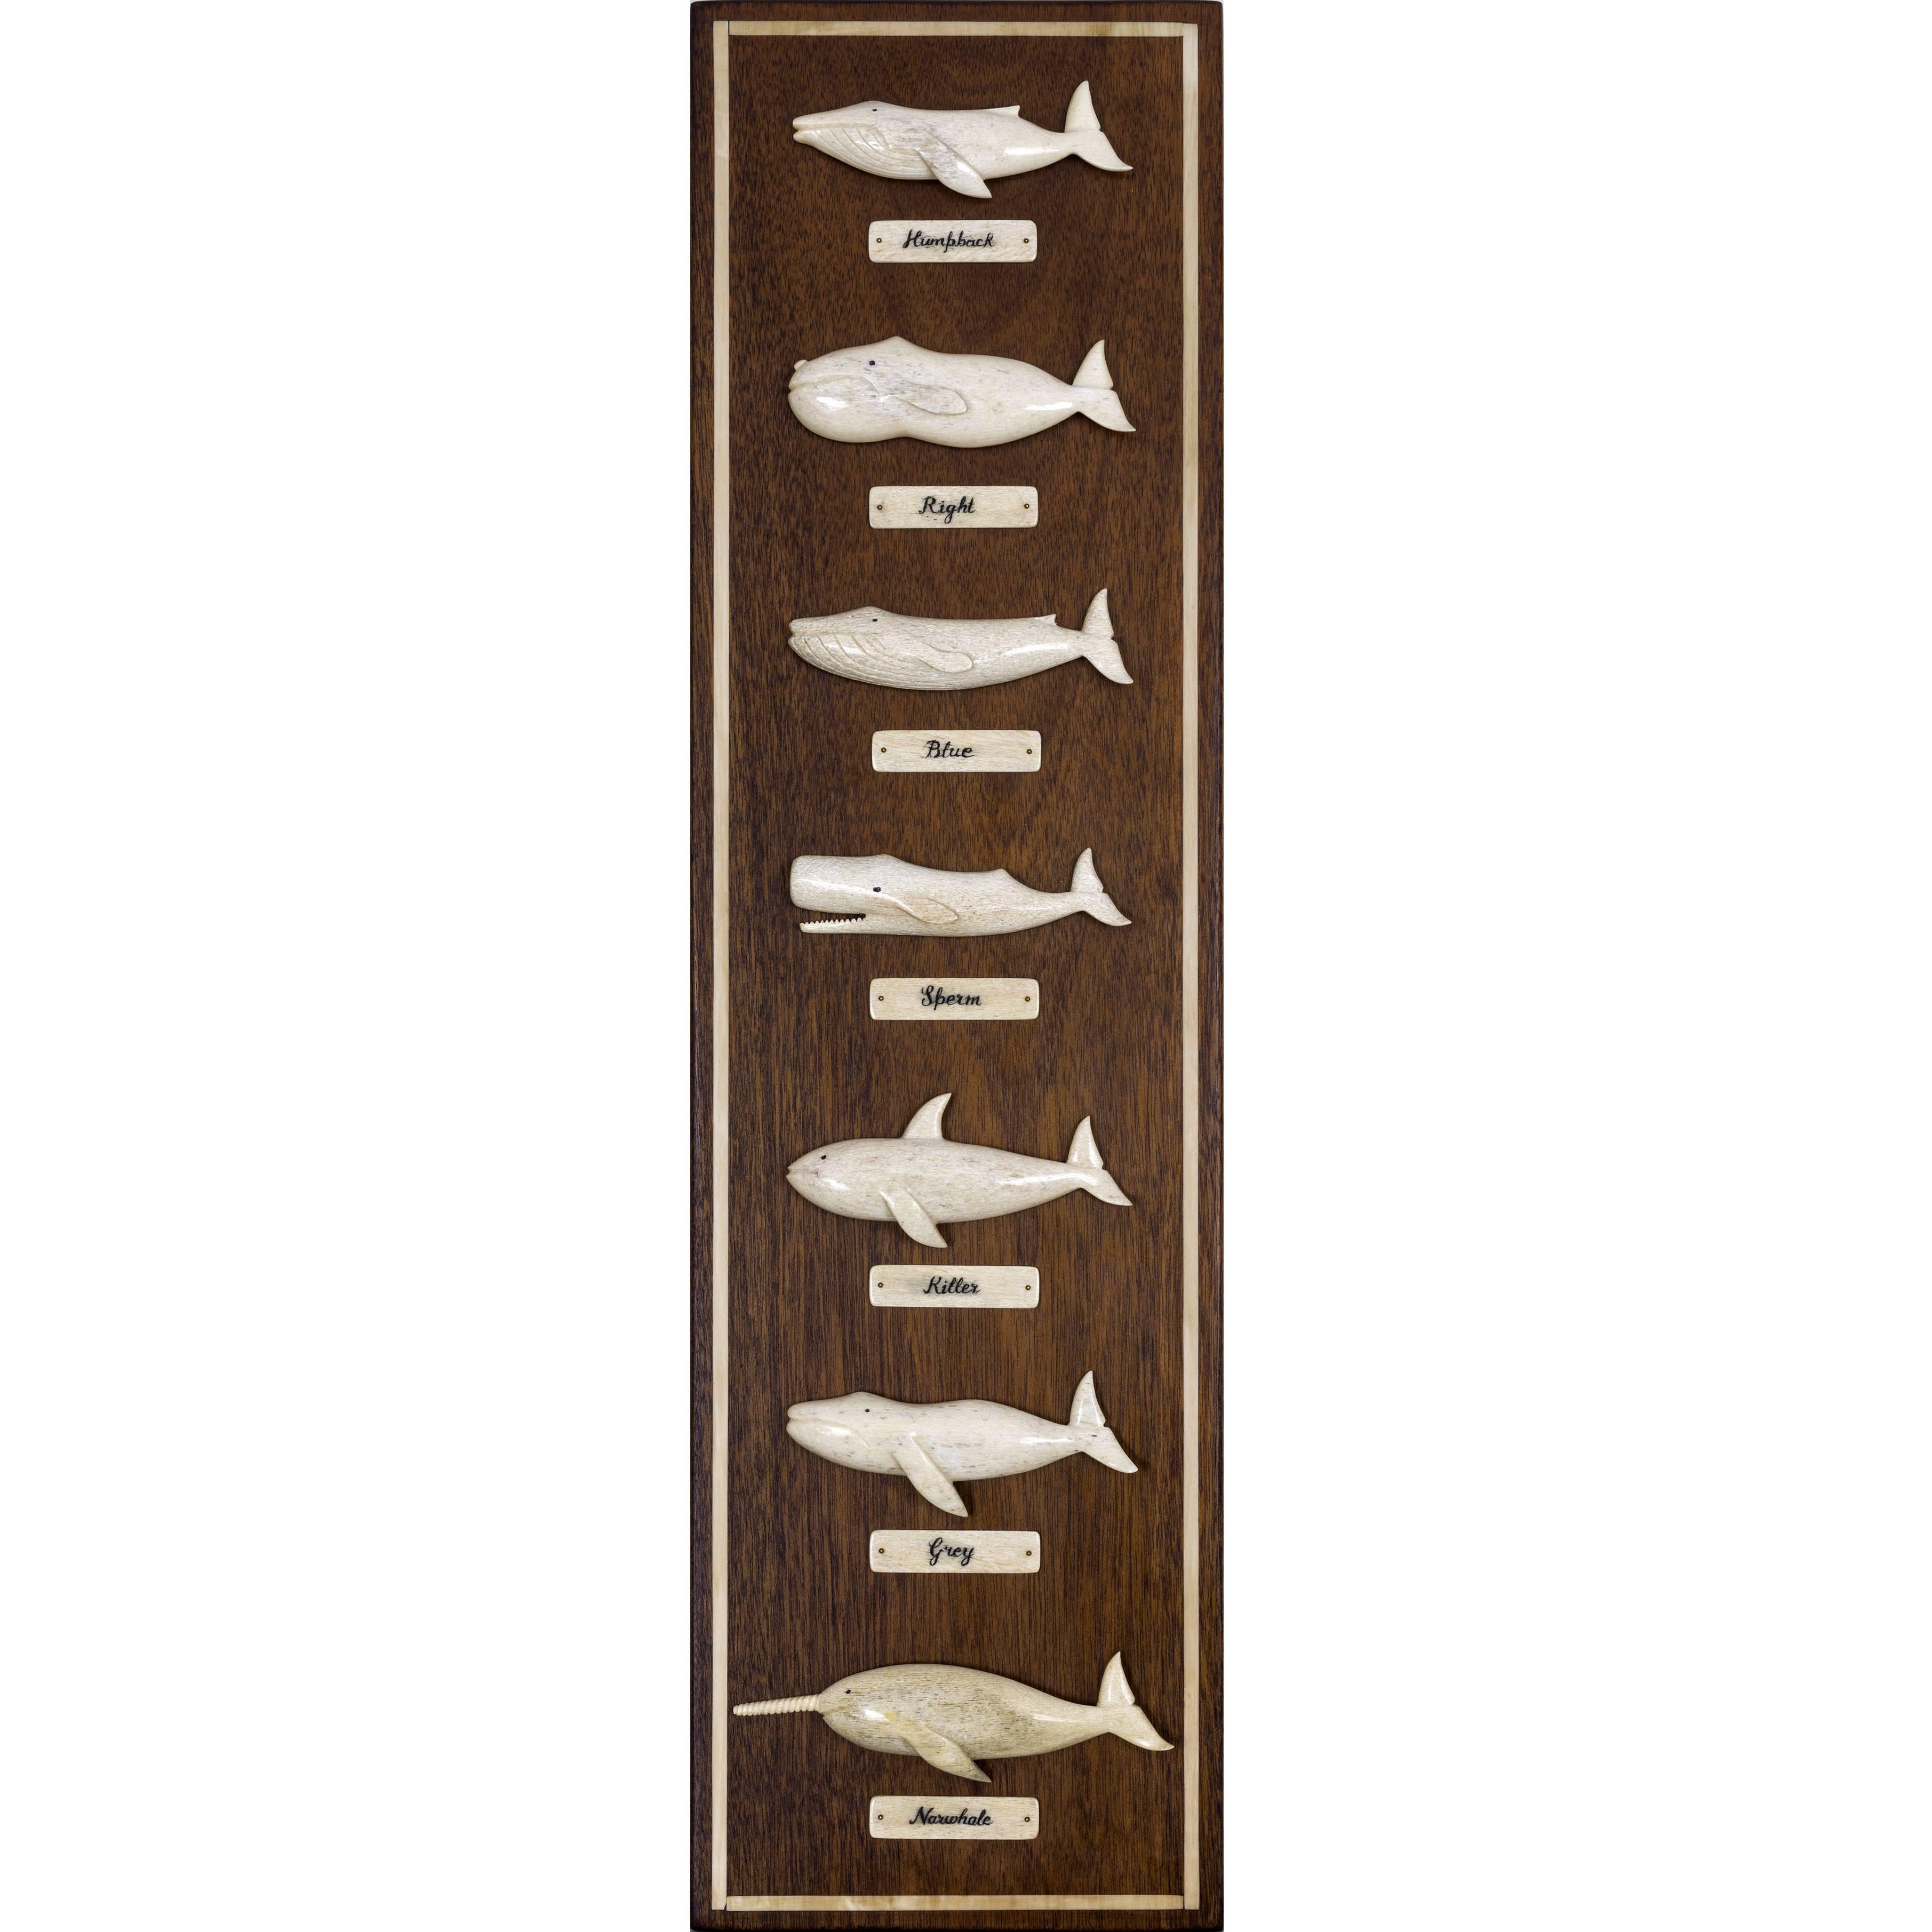 Mahogany Whaleboard Plaque with Seven Different Whale Species by Bill Sayle